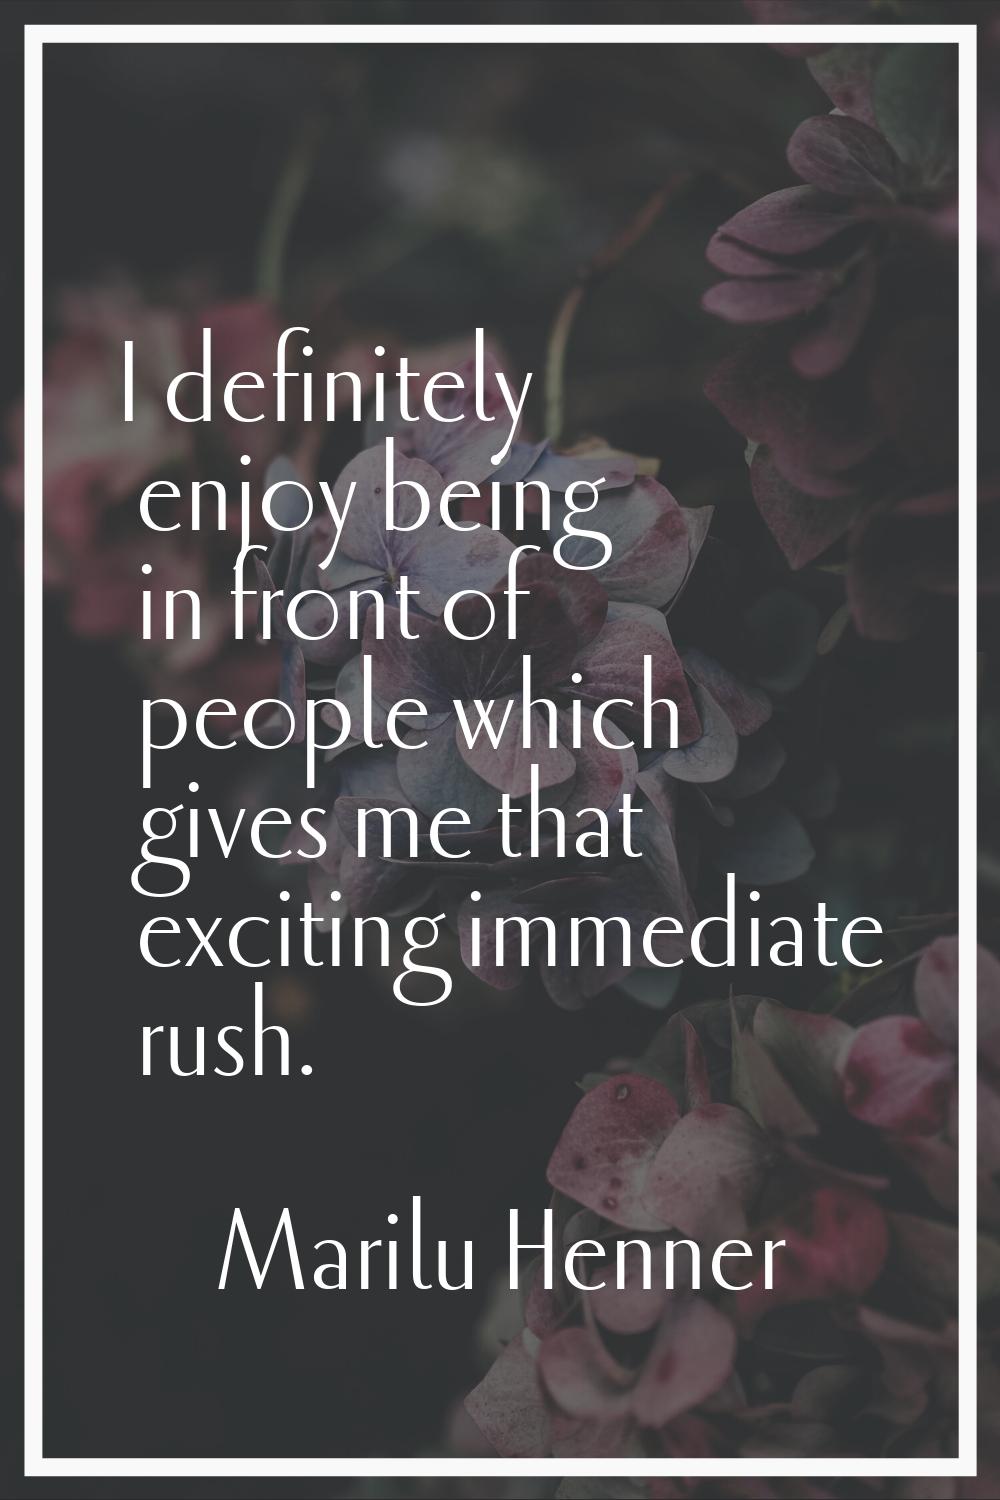 I definitely enjoy being in front of people which gives me that exciting immediate rush.